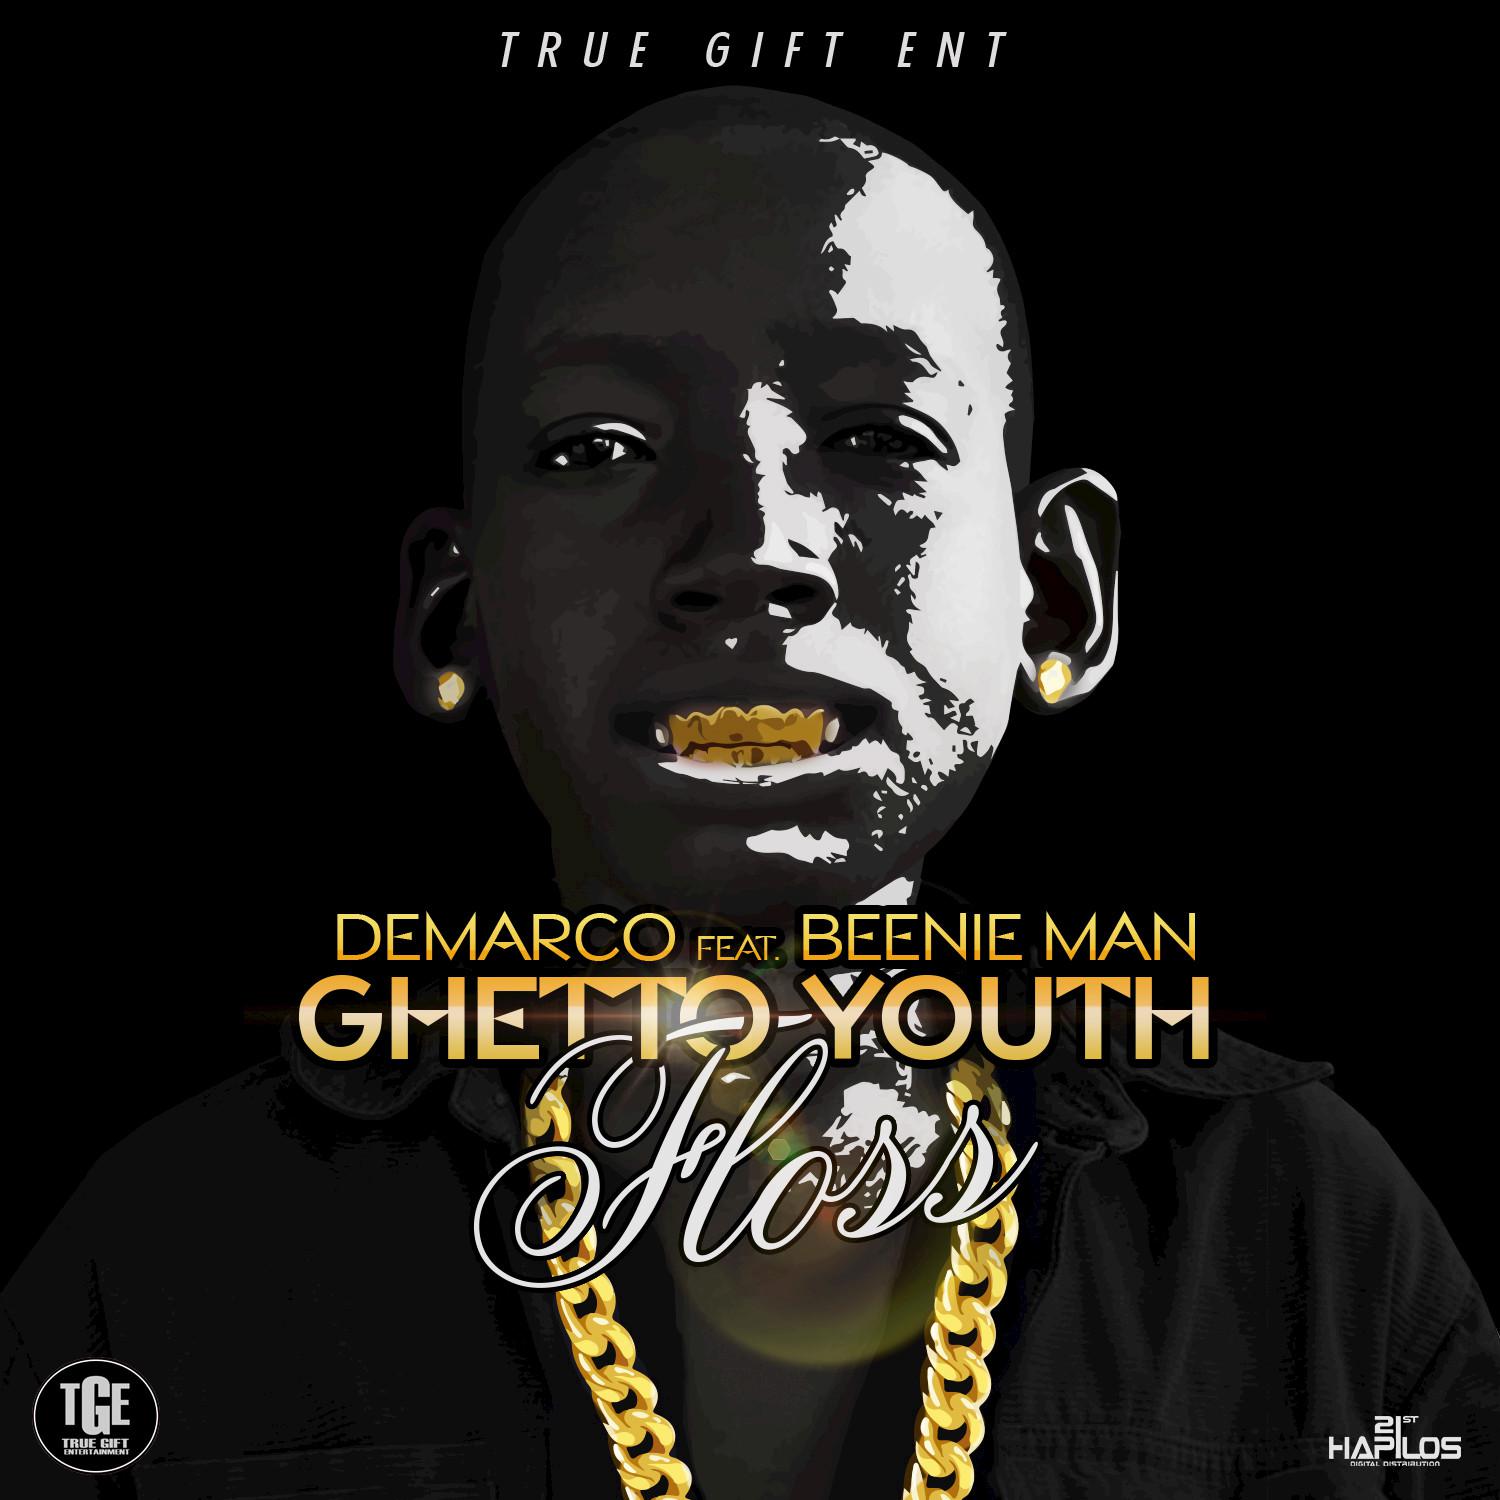 Ghetto Youth Floss